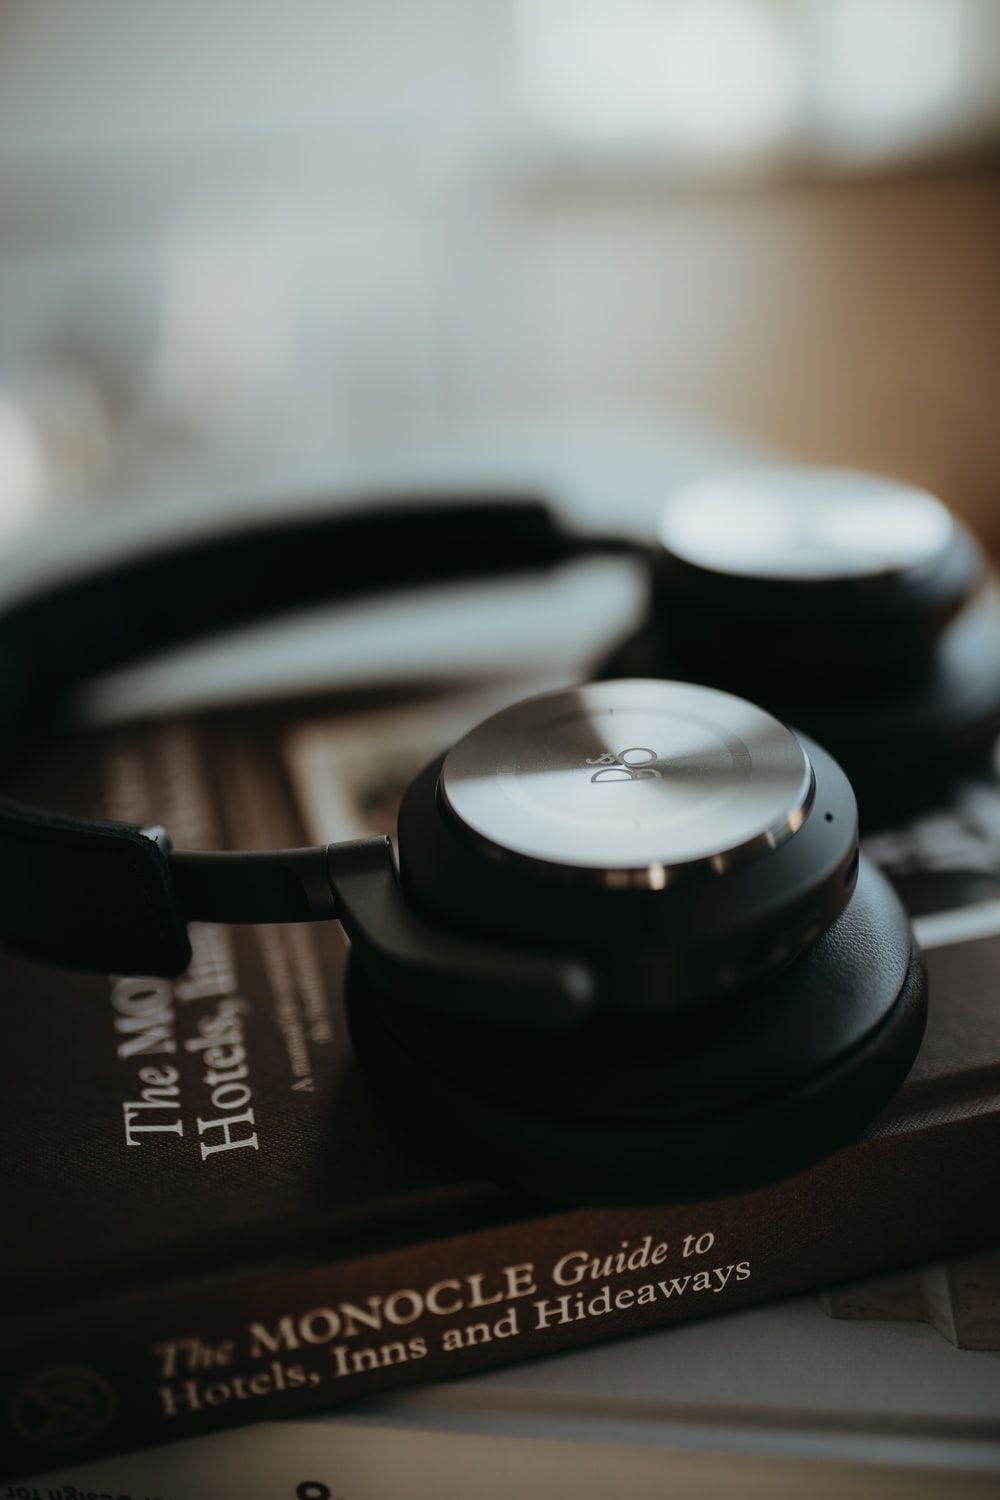 Headphones Book Picture. Download Free Image